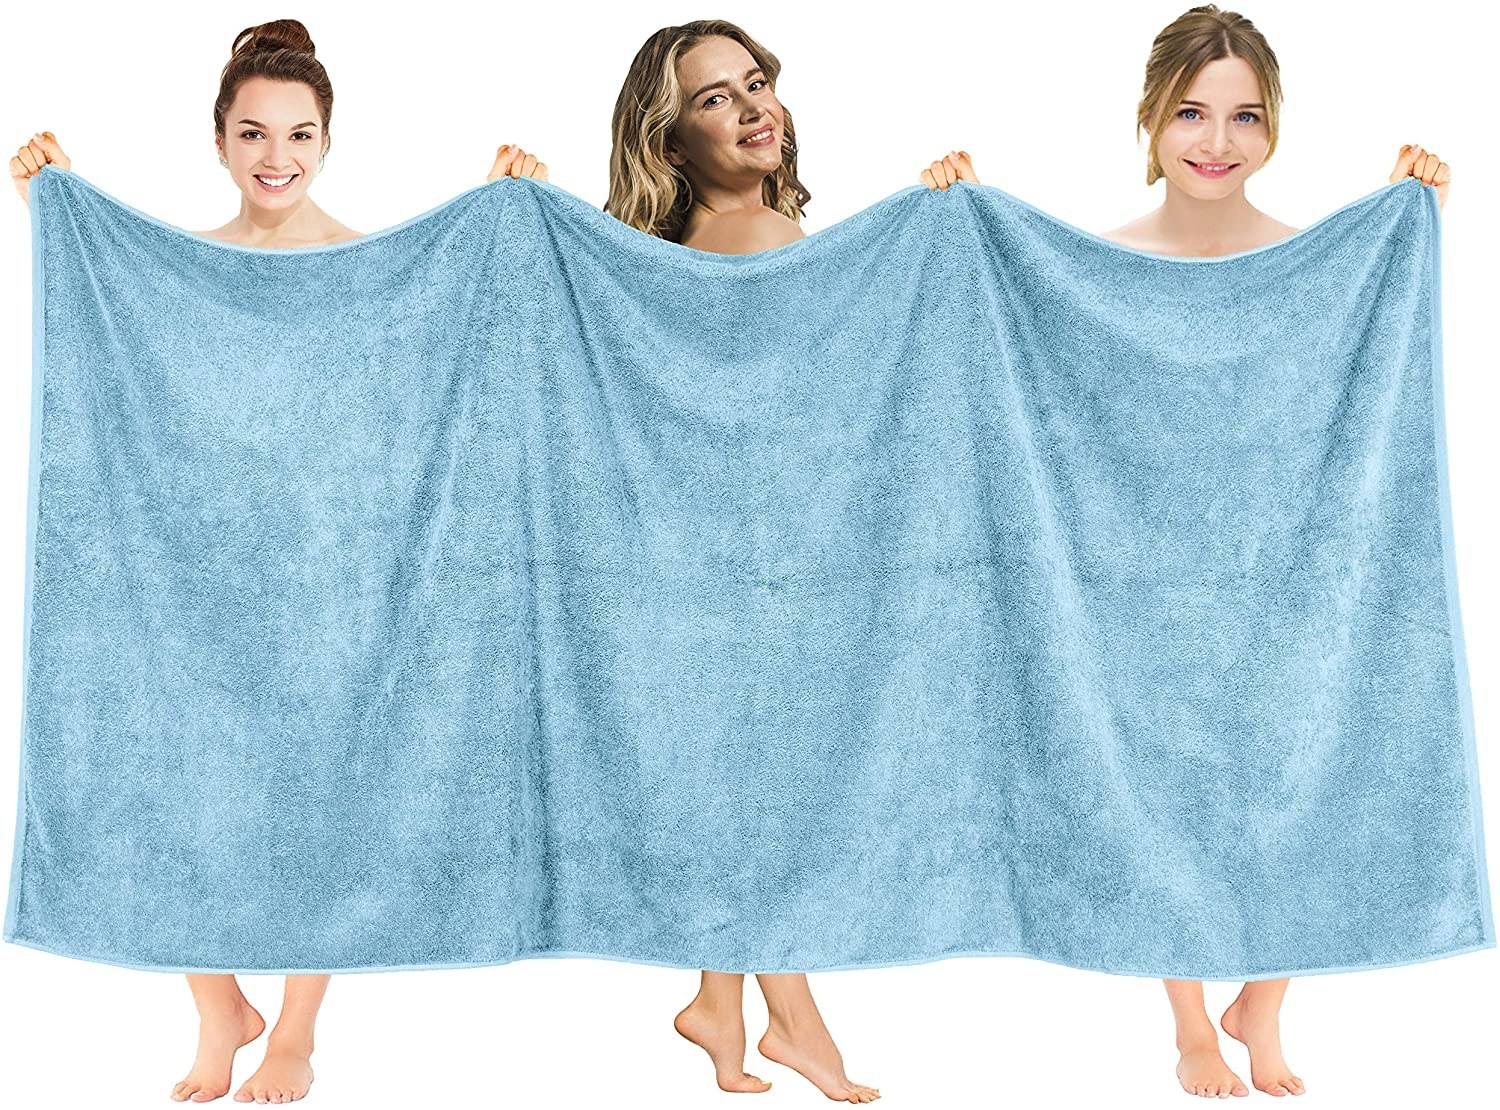 Three women holding up the extra large towel